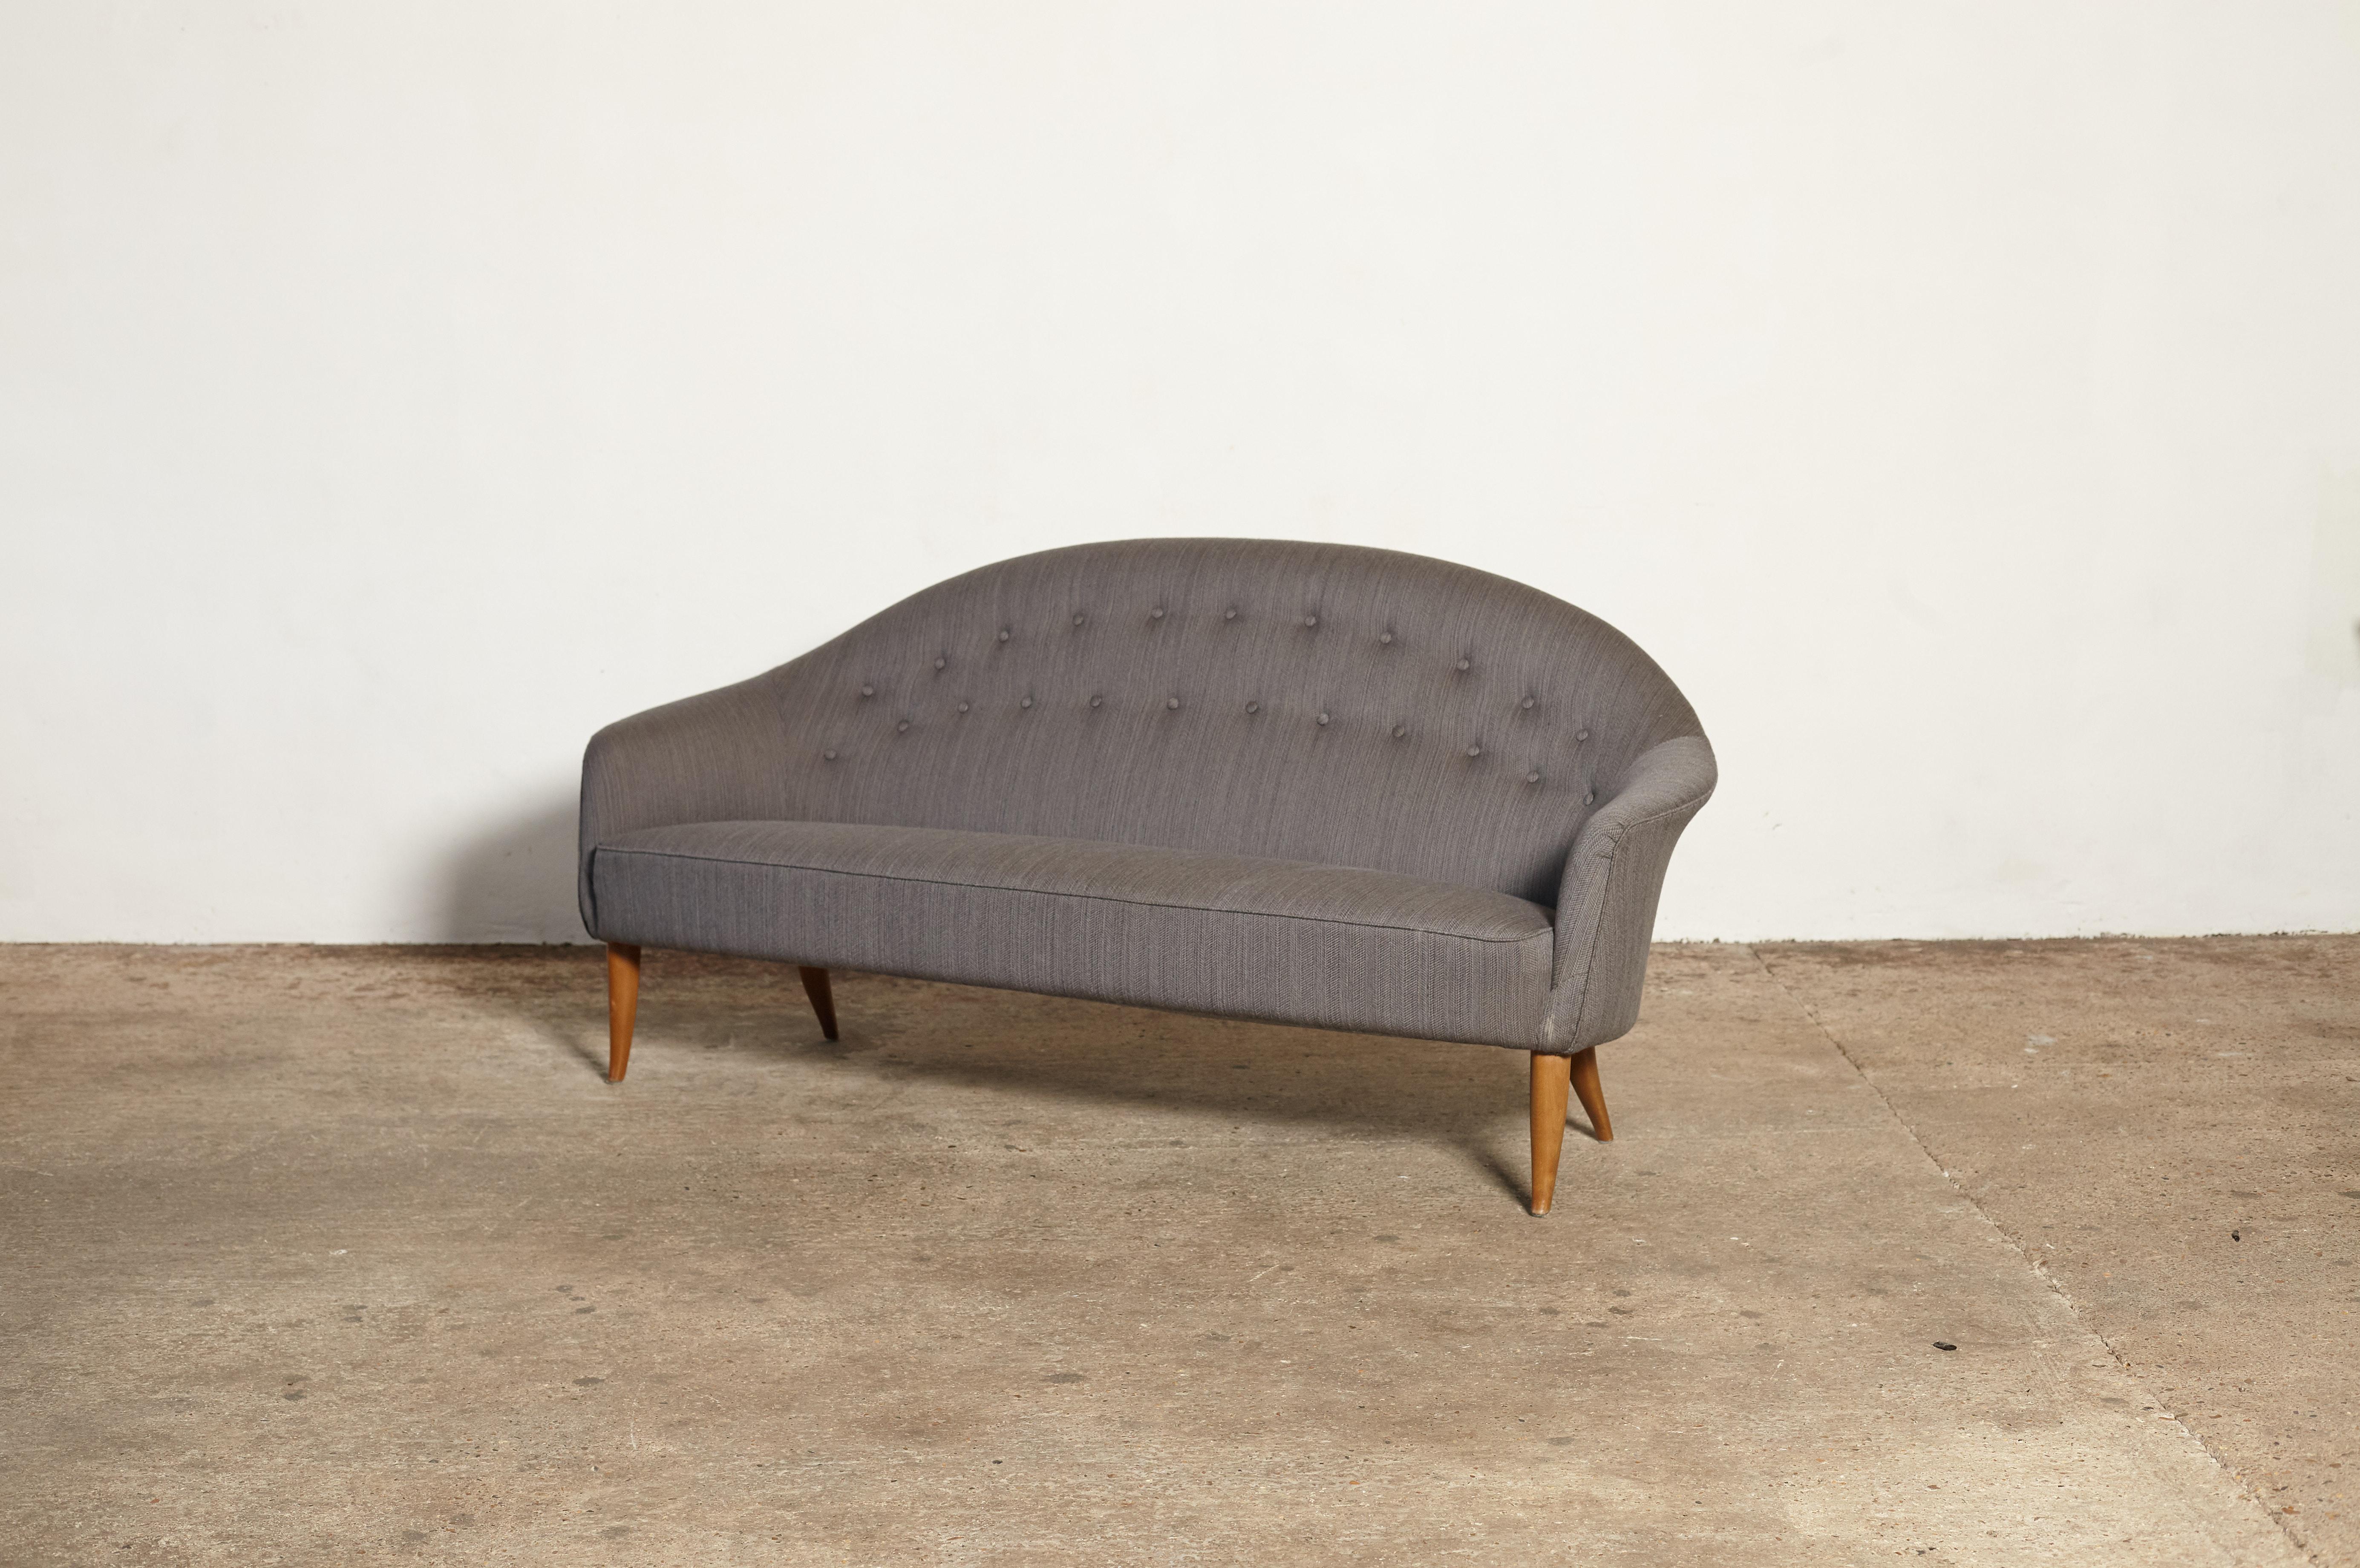 Curved Kerstin Horlin Holmqvist ‘Holmquist’ Paradiset ‘Paradise’ sofa designed in the 1950s for Nordiska Kompaniet (NK), Sweden. Upholstered in grey fabric.  Ships worldwide.




UK customers please note:    displayed prices do not include VAT.